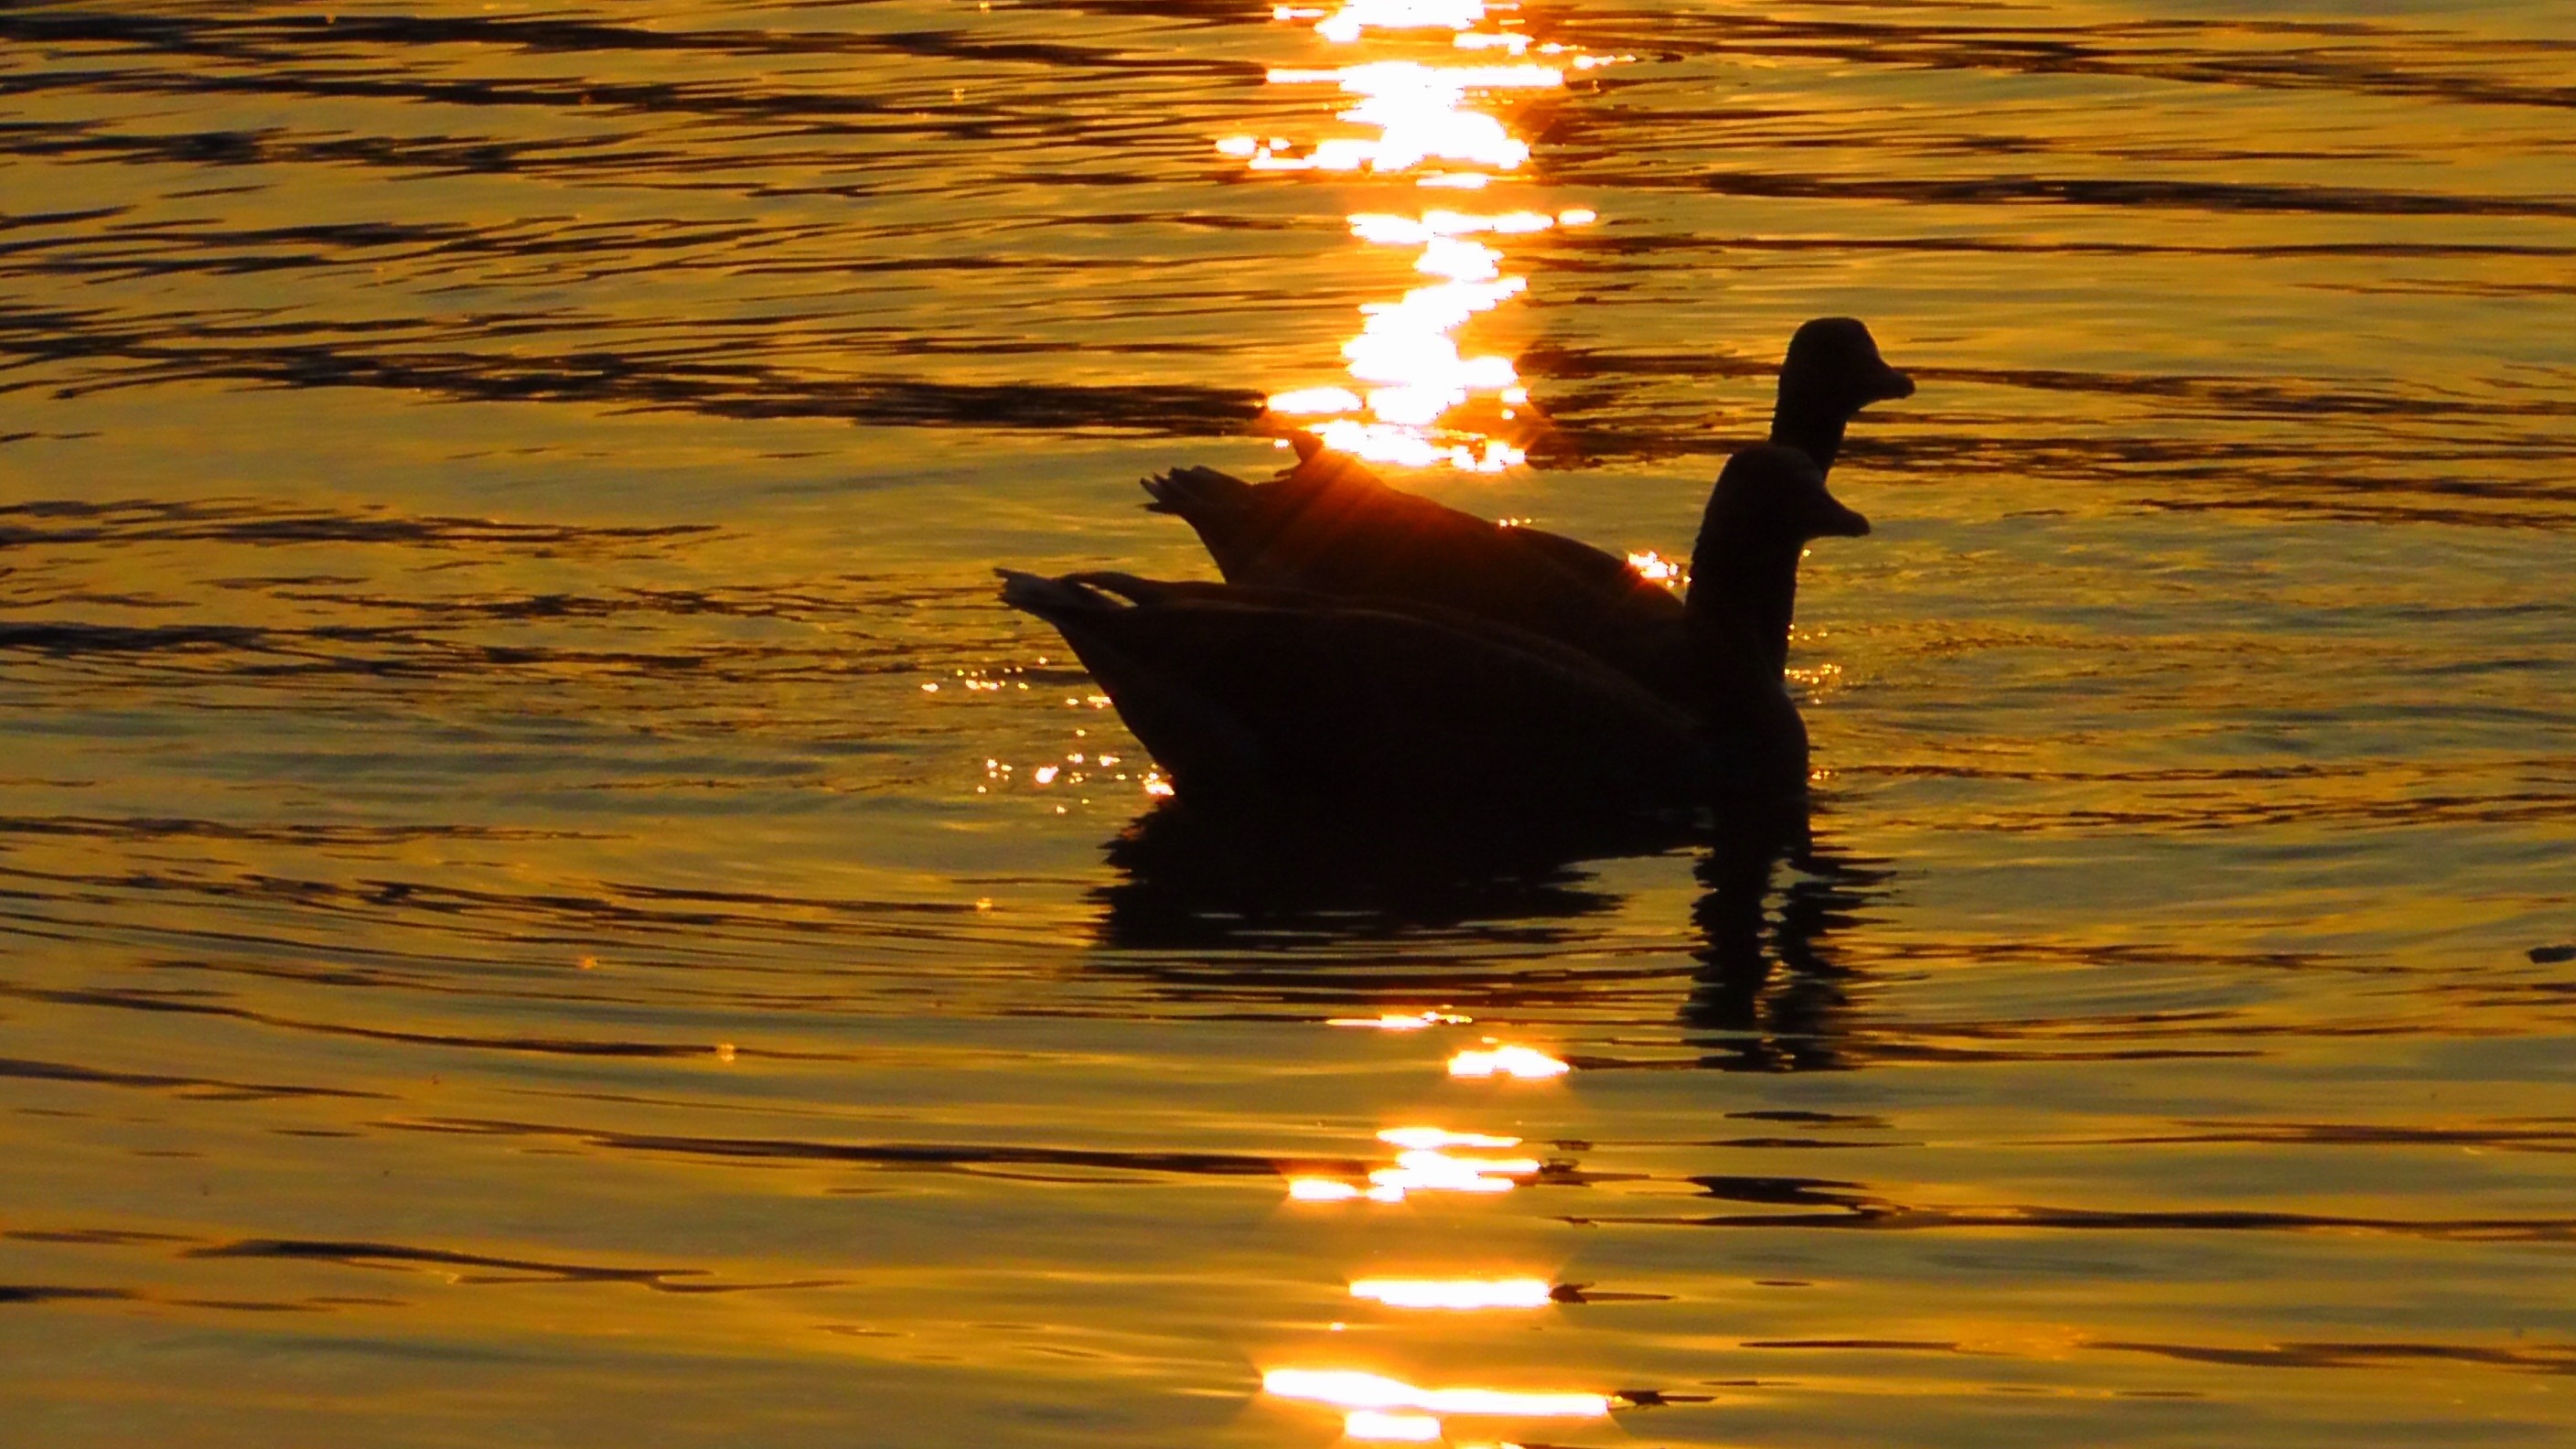 silhouette of duck